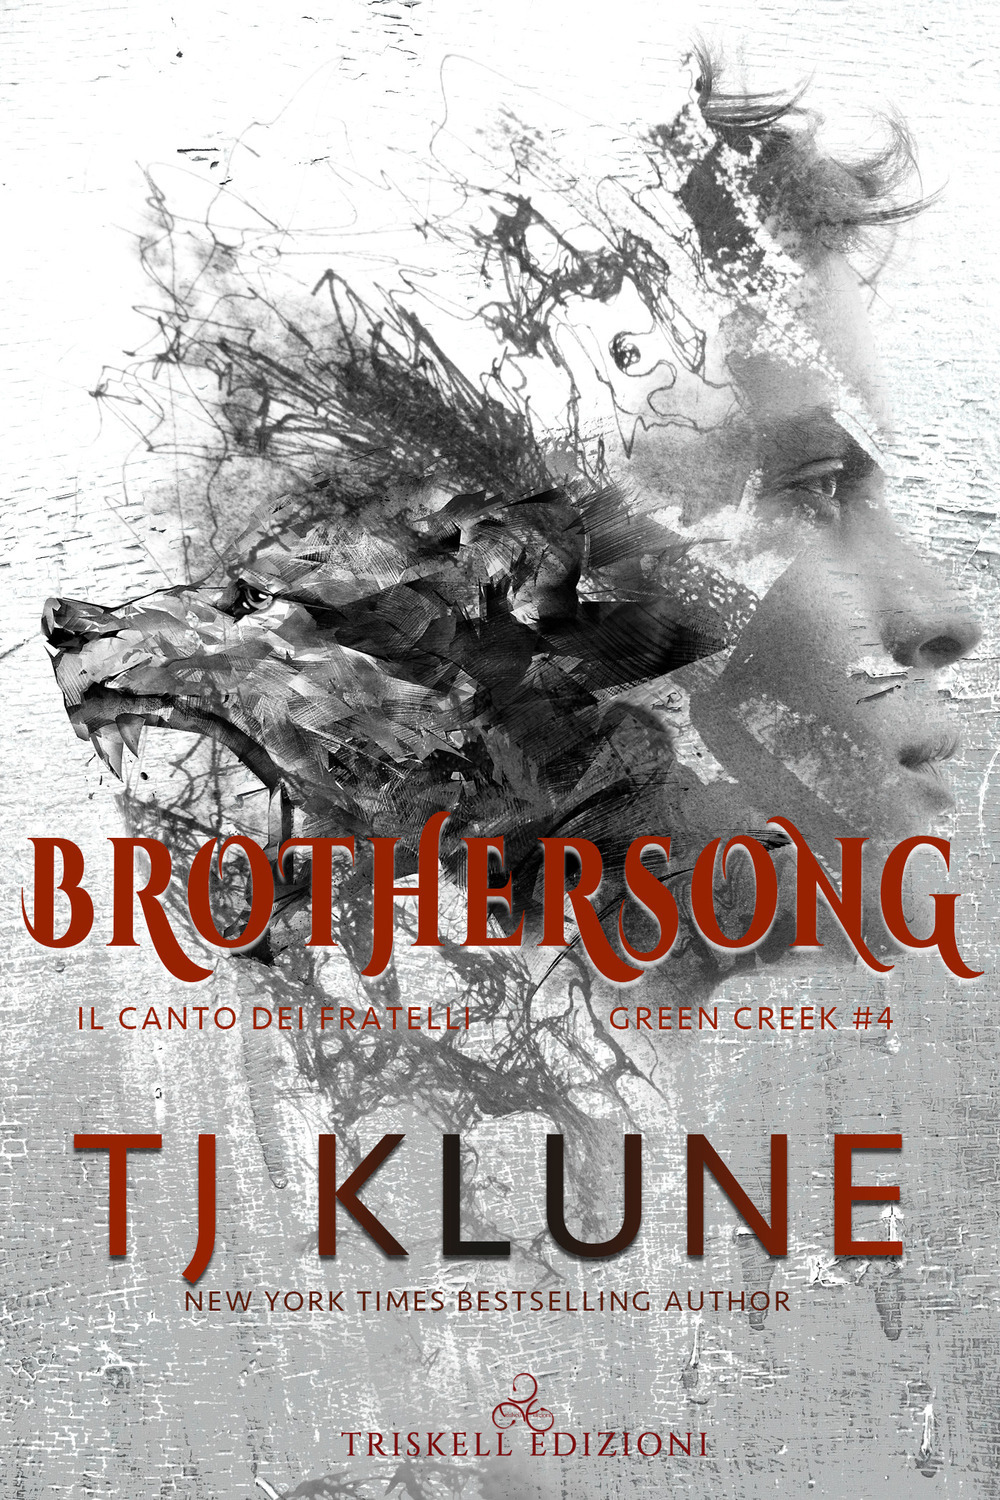 Brothersong. Il canto dei fratelli by TJ Klune